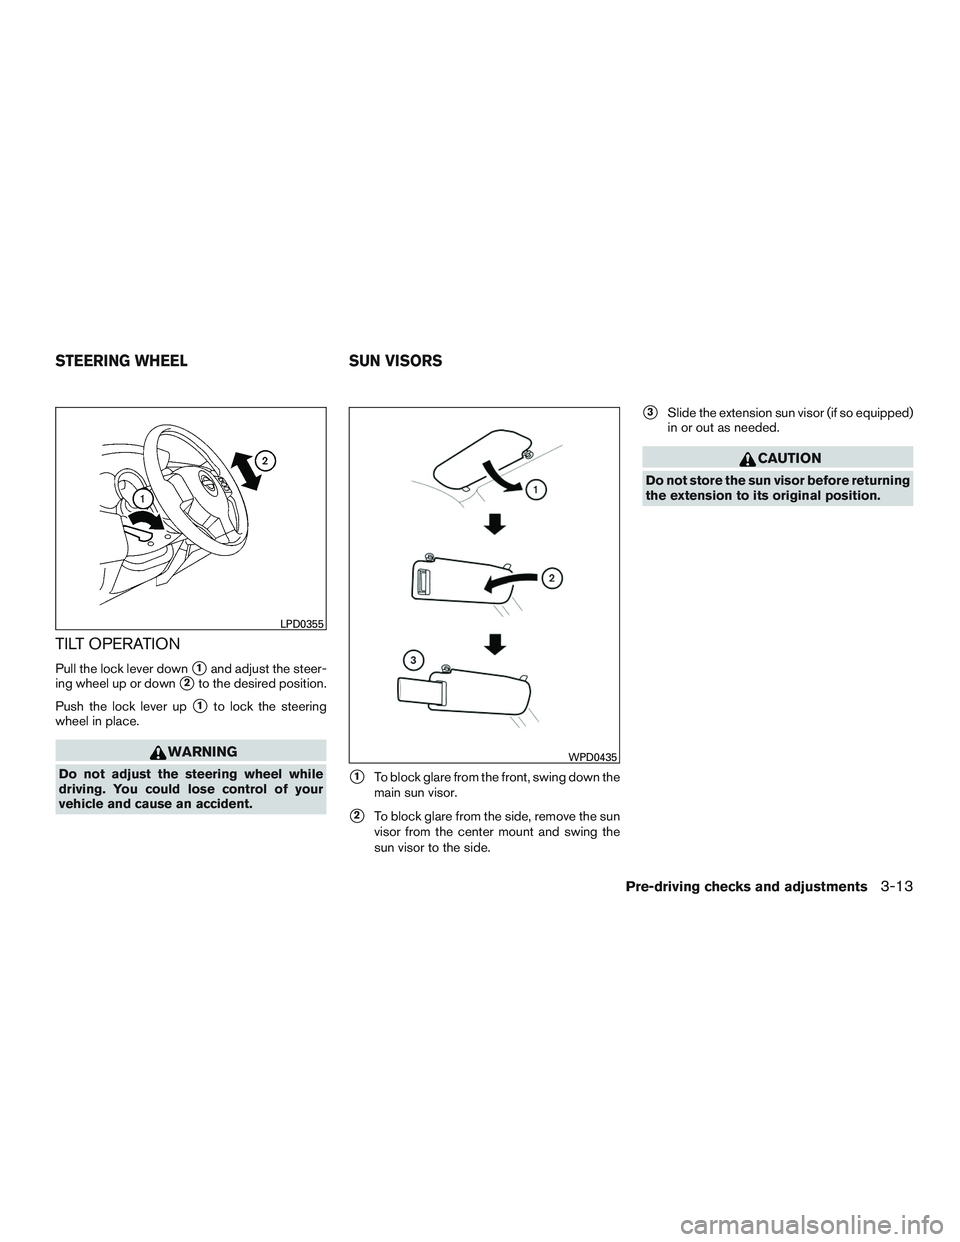 NISSAN MICRA 2015  Owner´s Manual TILT OPERATION
Pull the lock lever down1and adjust the steer-
ing wheel up or down
2to the desired position.
Push the lock lever up
1to lock the steering
wheel in place.
WARNING
Do not adjust the s